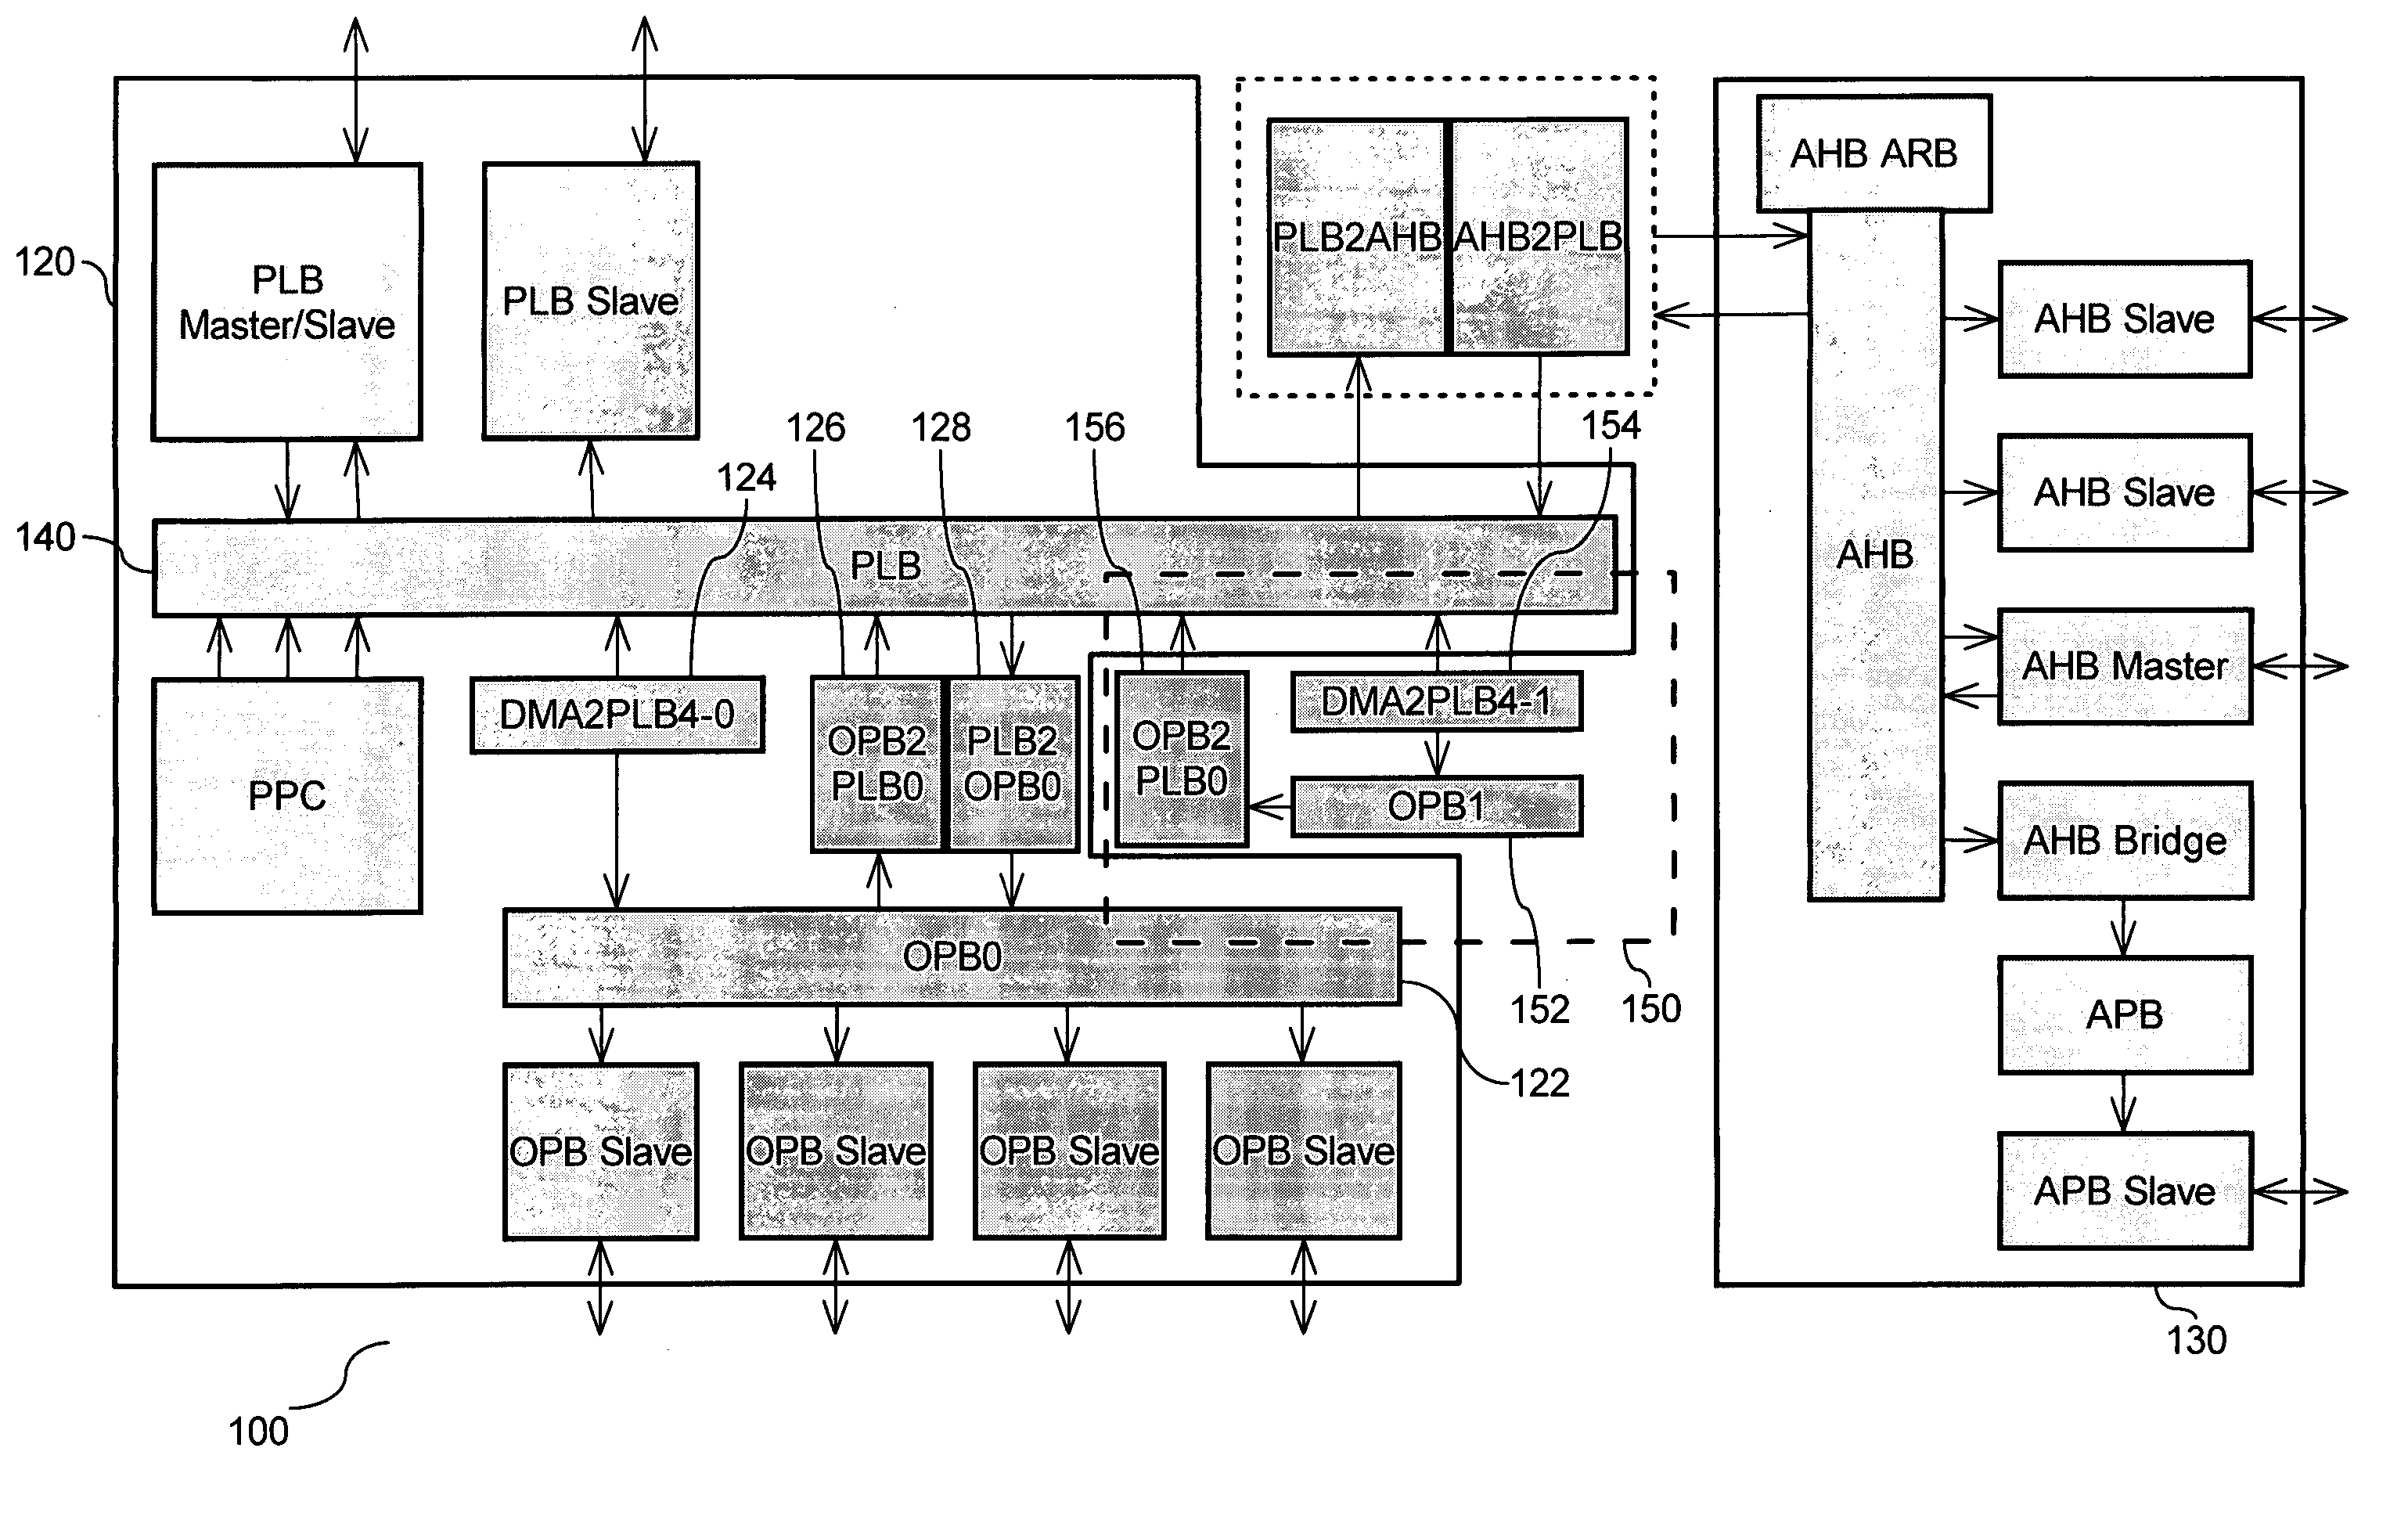 System-On-a-Chip mixed bus architecture